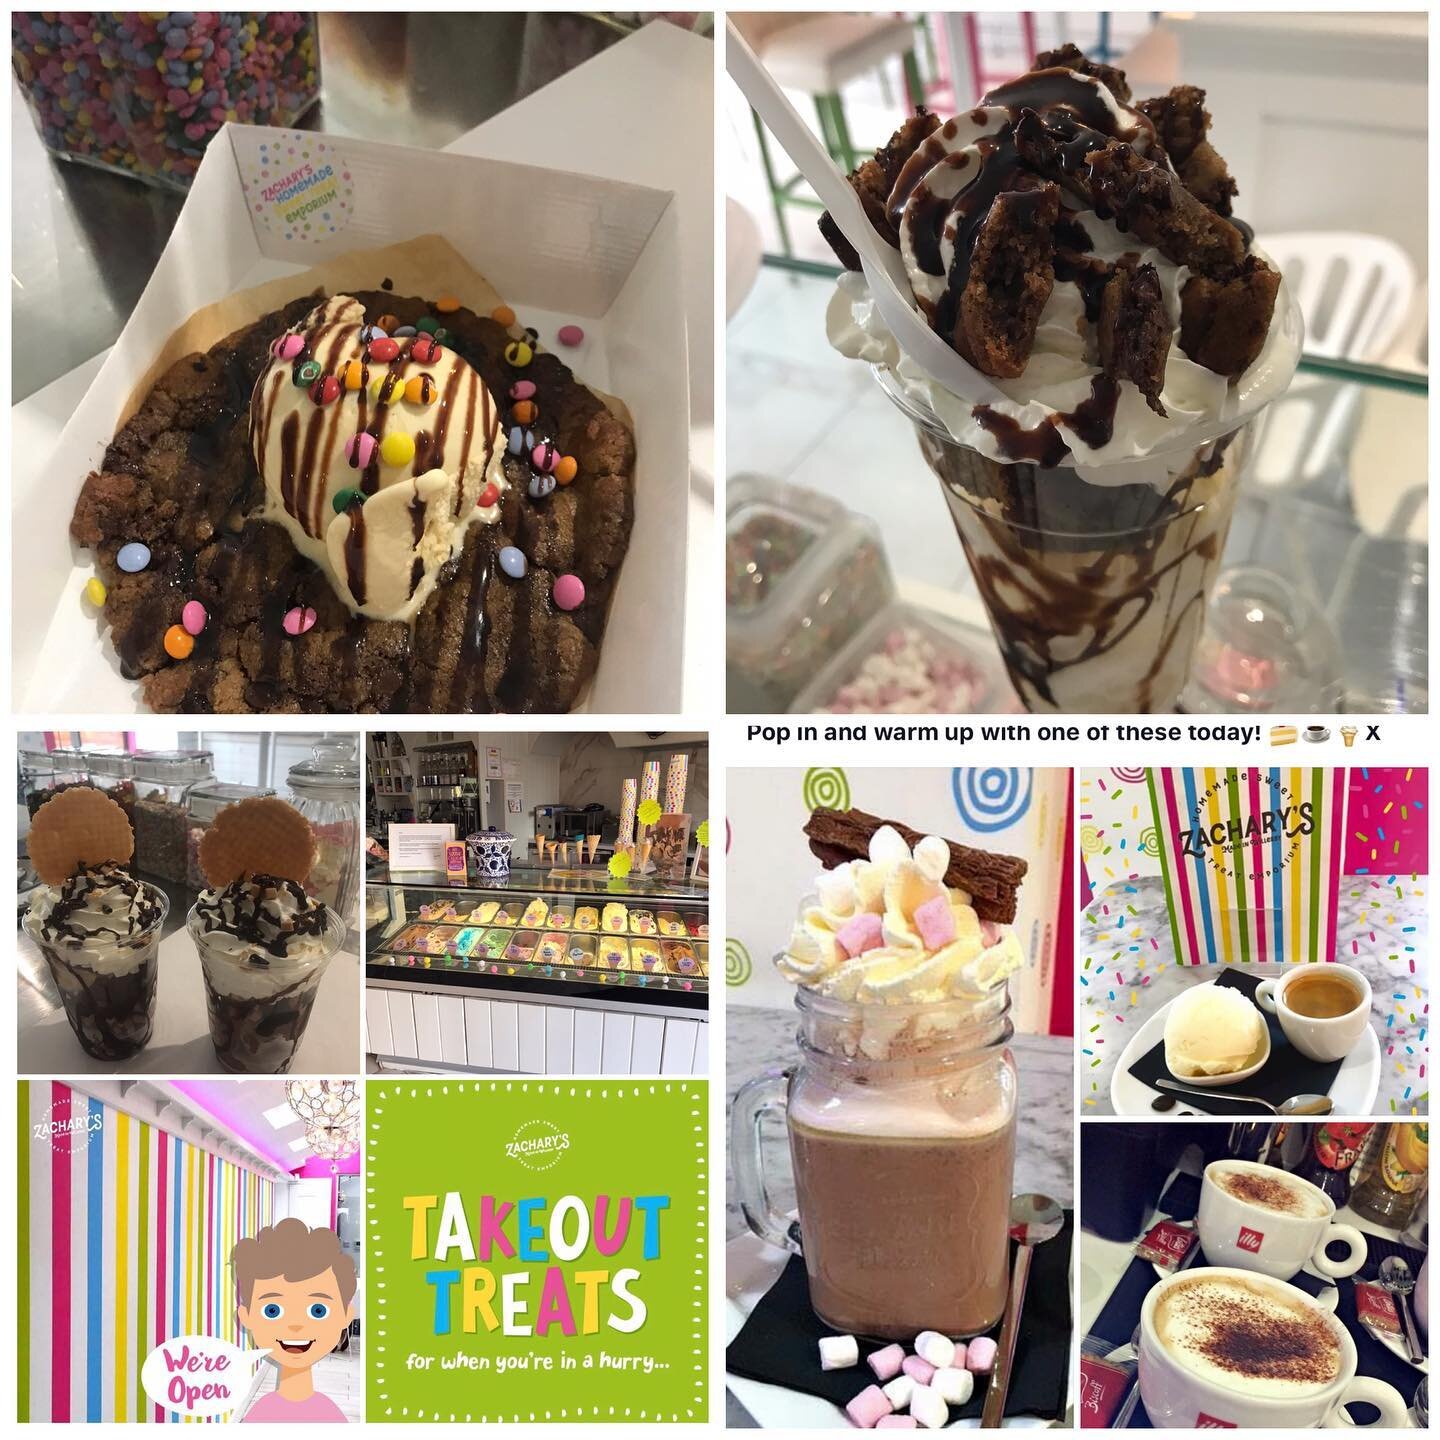 Zachary&rsquo;s is open today 11-5 for all your takeaway treats🍪🍦☕️🥤🍨xx